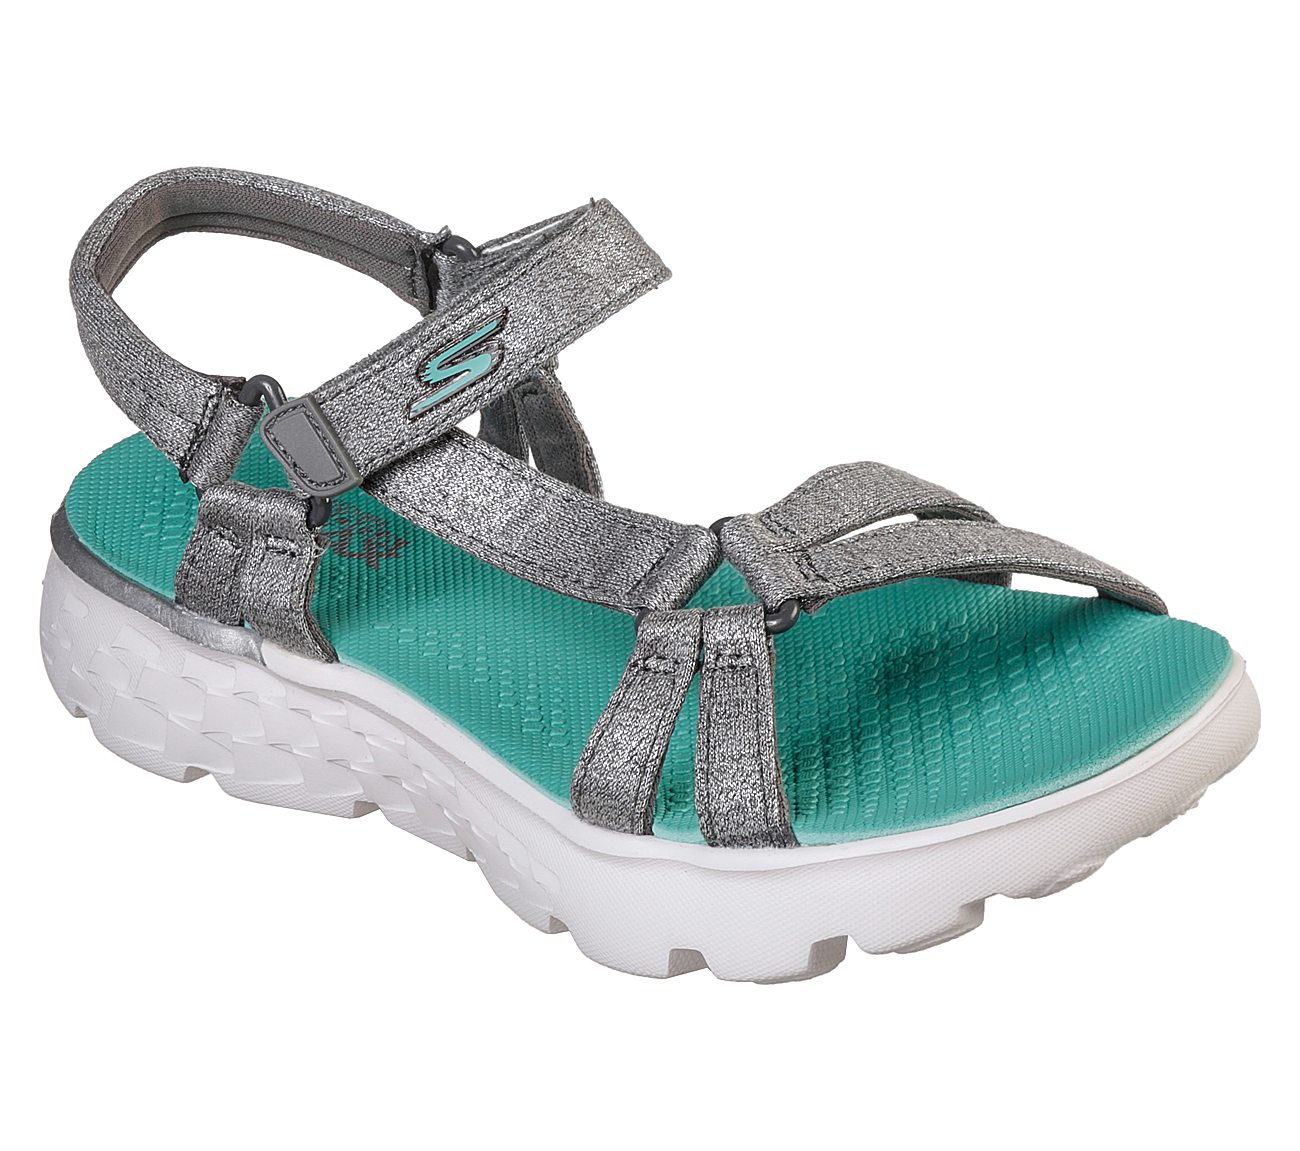 ON-THE-GO 400-LIL RADIANCE, GREY/TURQUOISE Footwear Lateral View